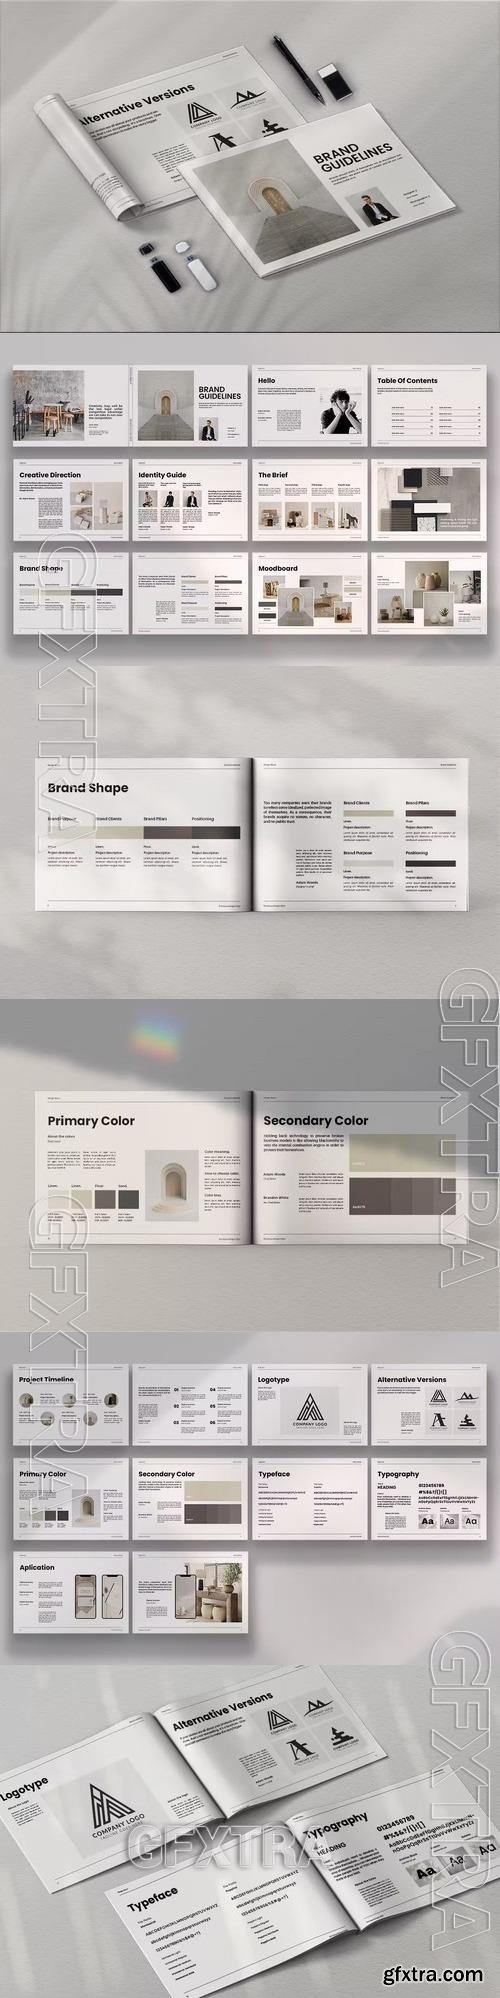 Brand Guidelines X7L92CT